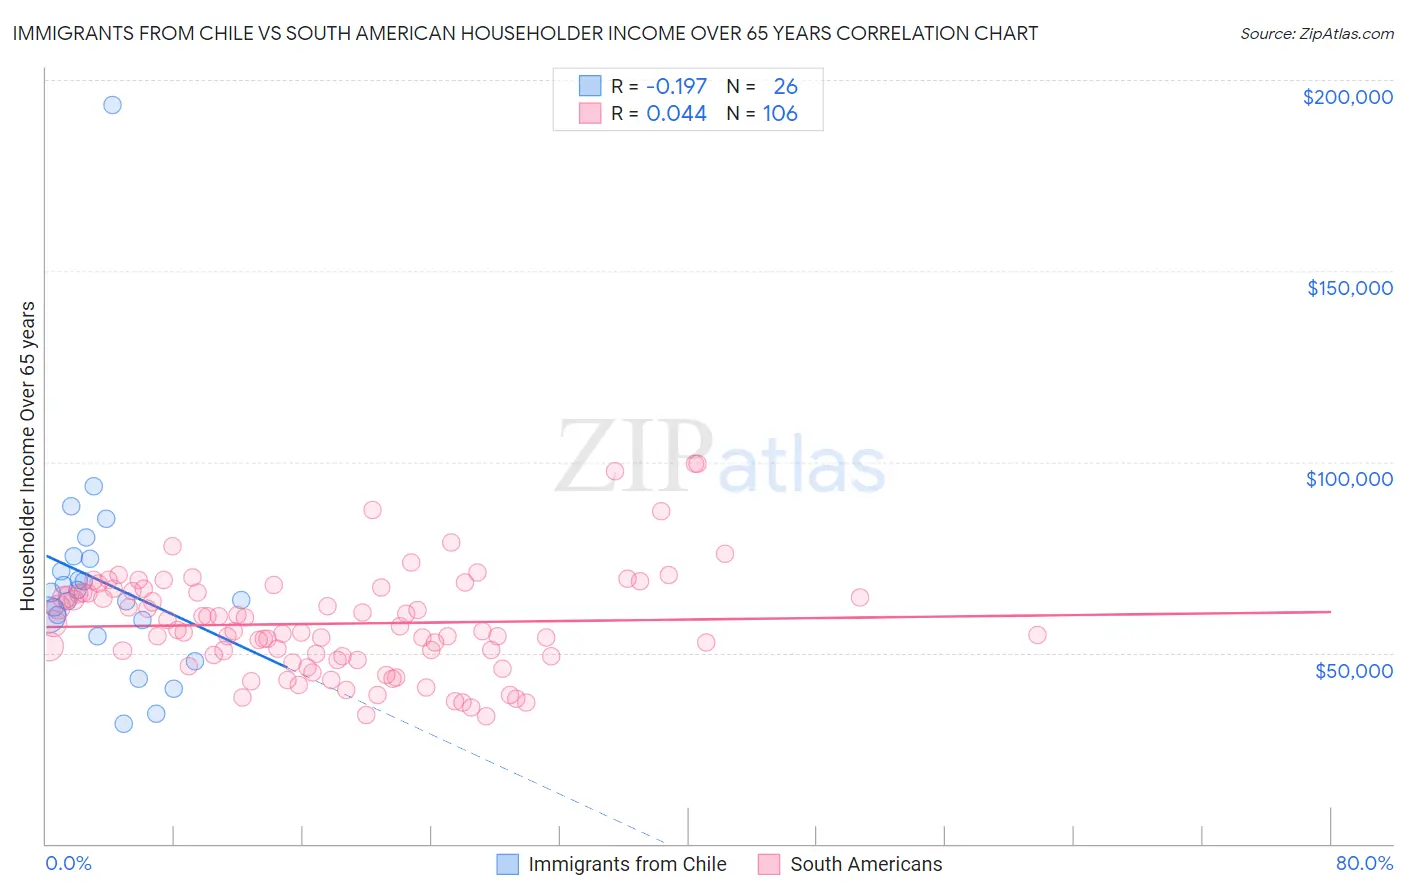 Immigrants from Chile vs South American Householder Income Over 65 years